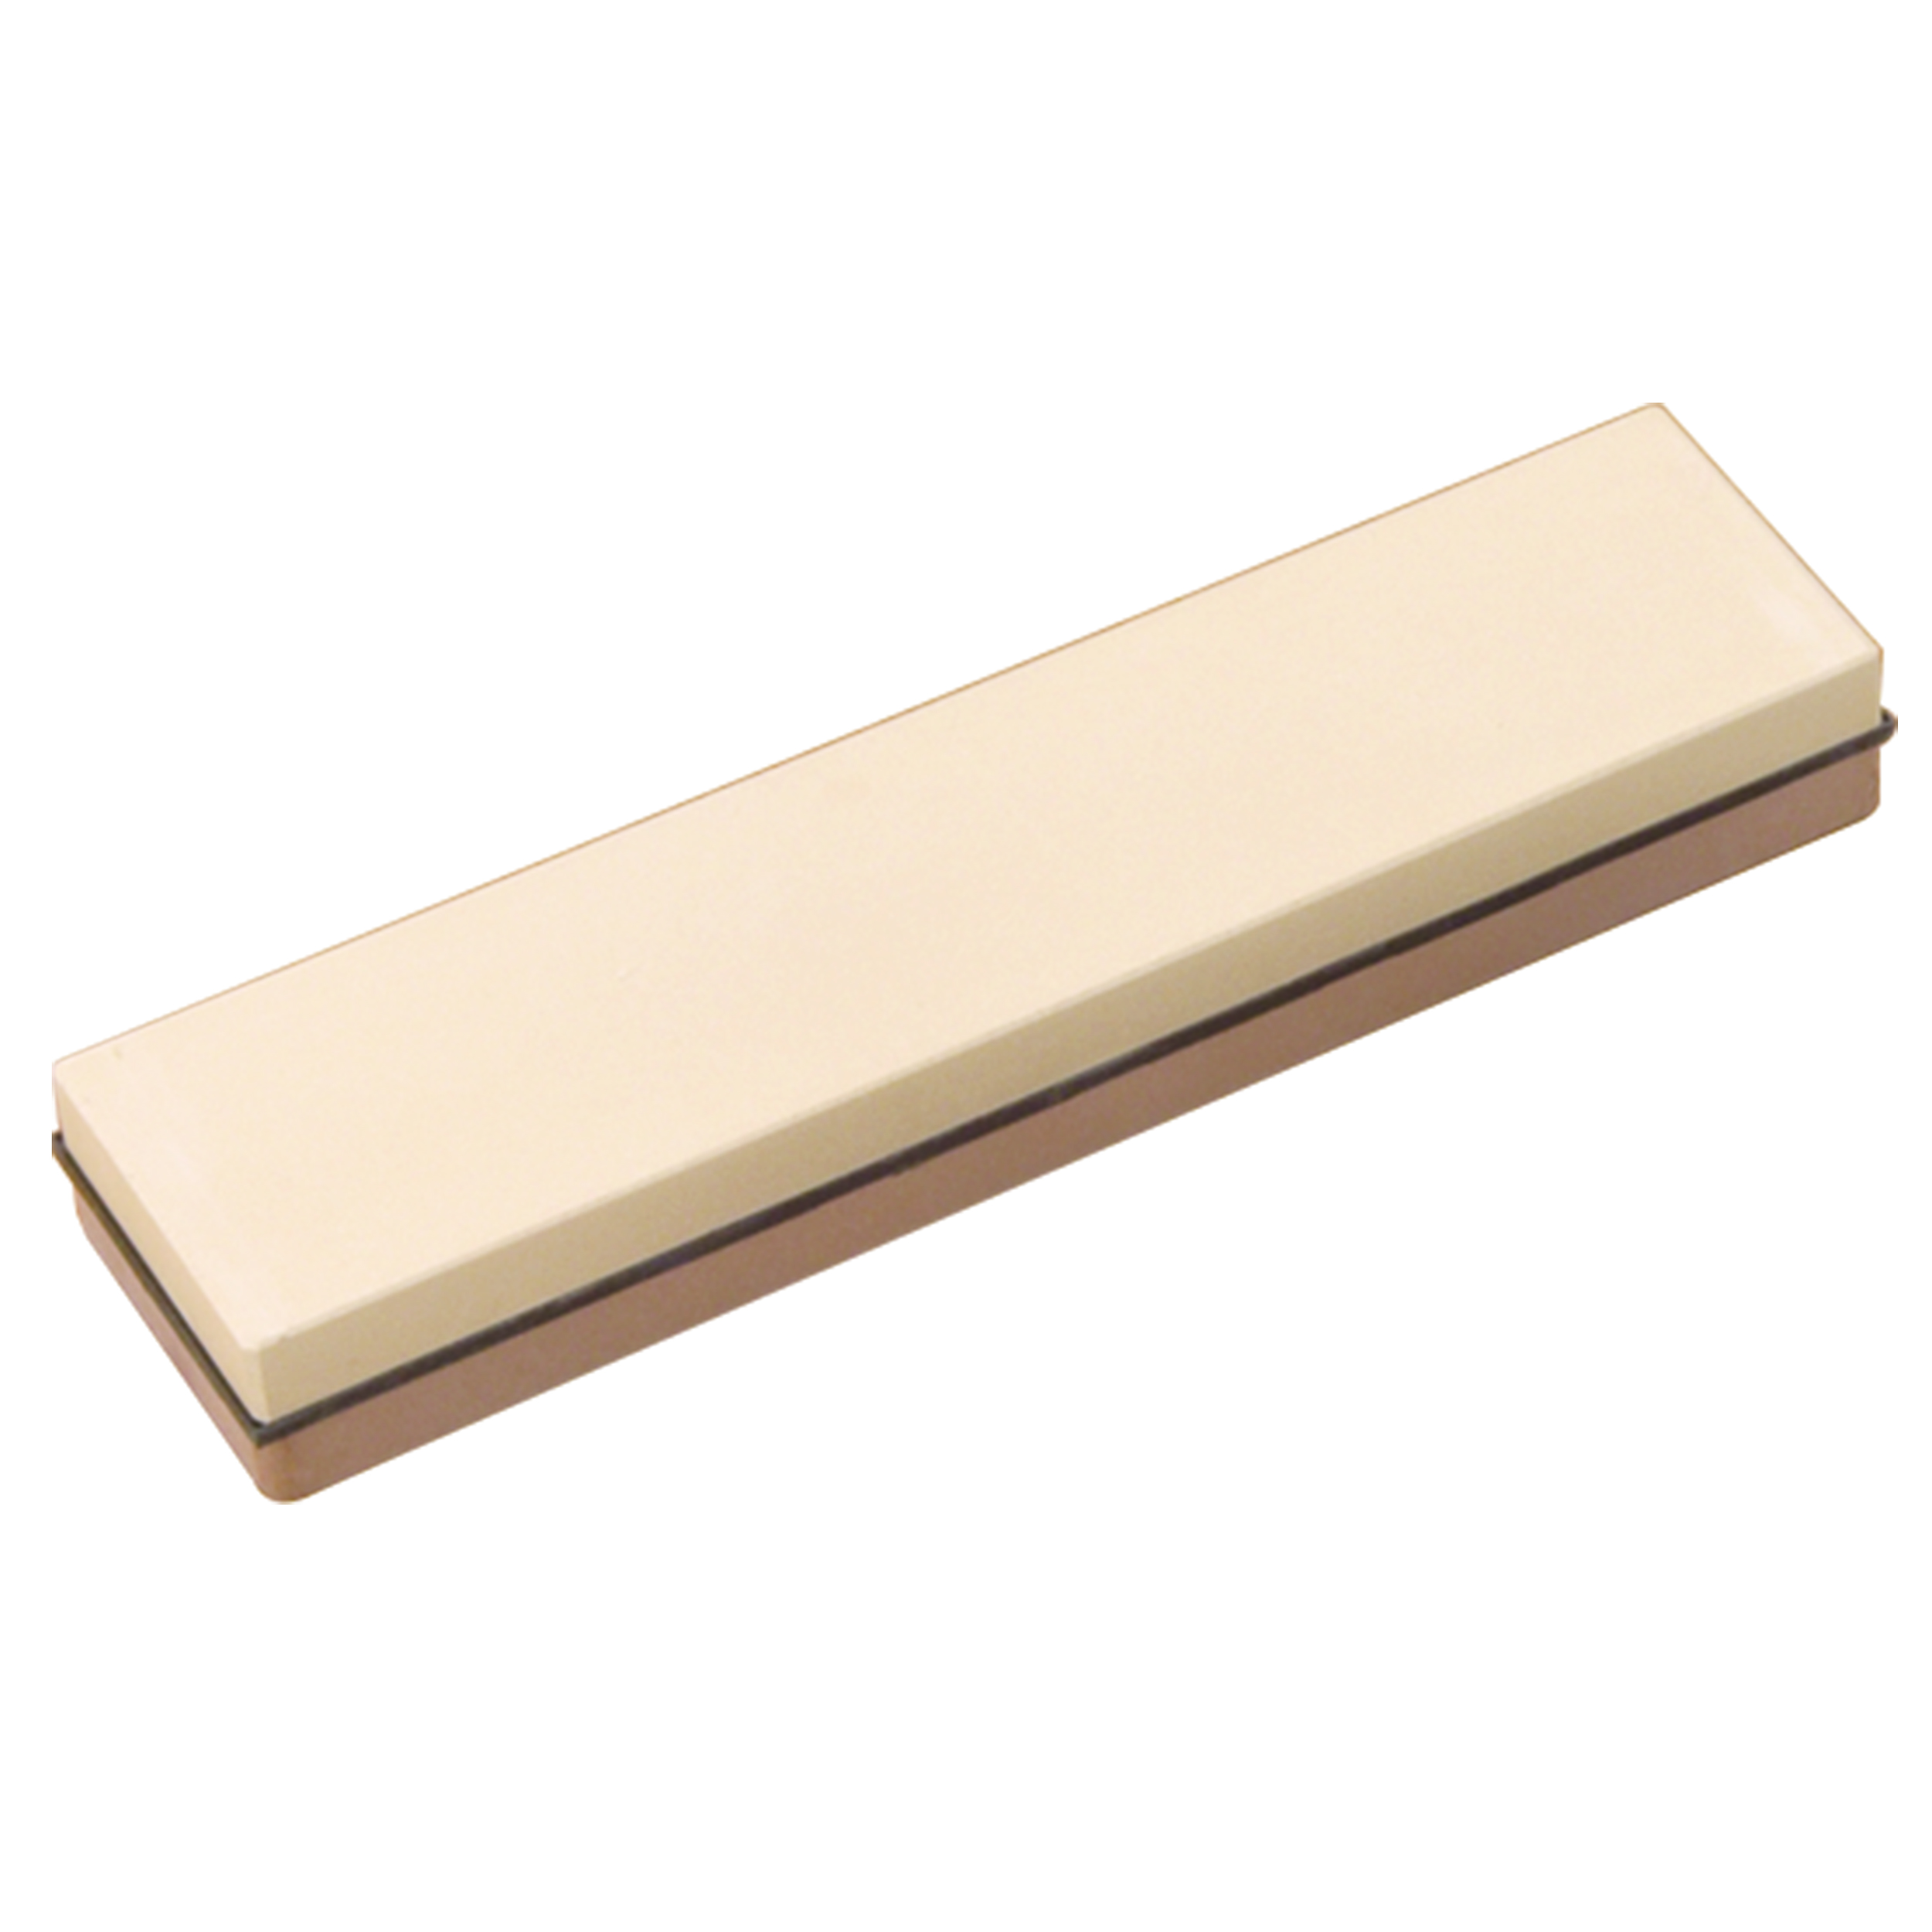 Combination Waterstone, 8" X 2" X 1", 1000/6000 Grit